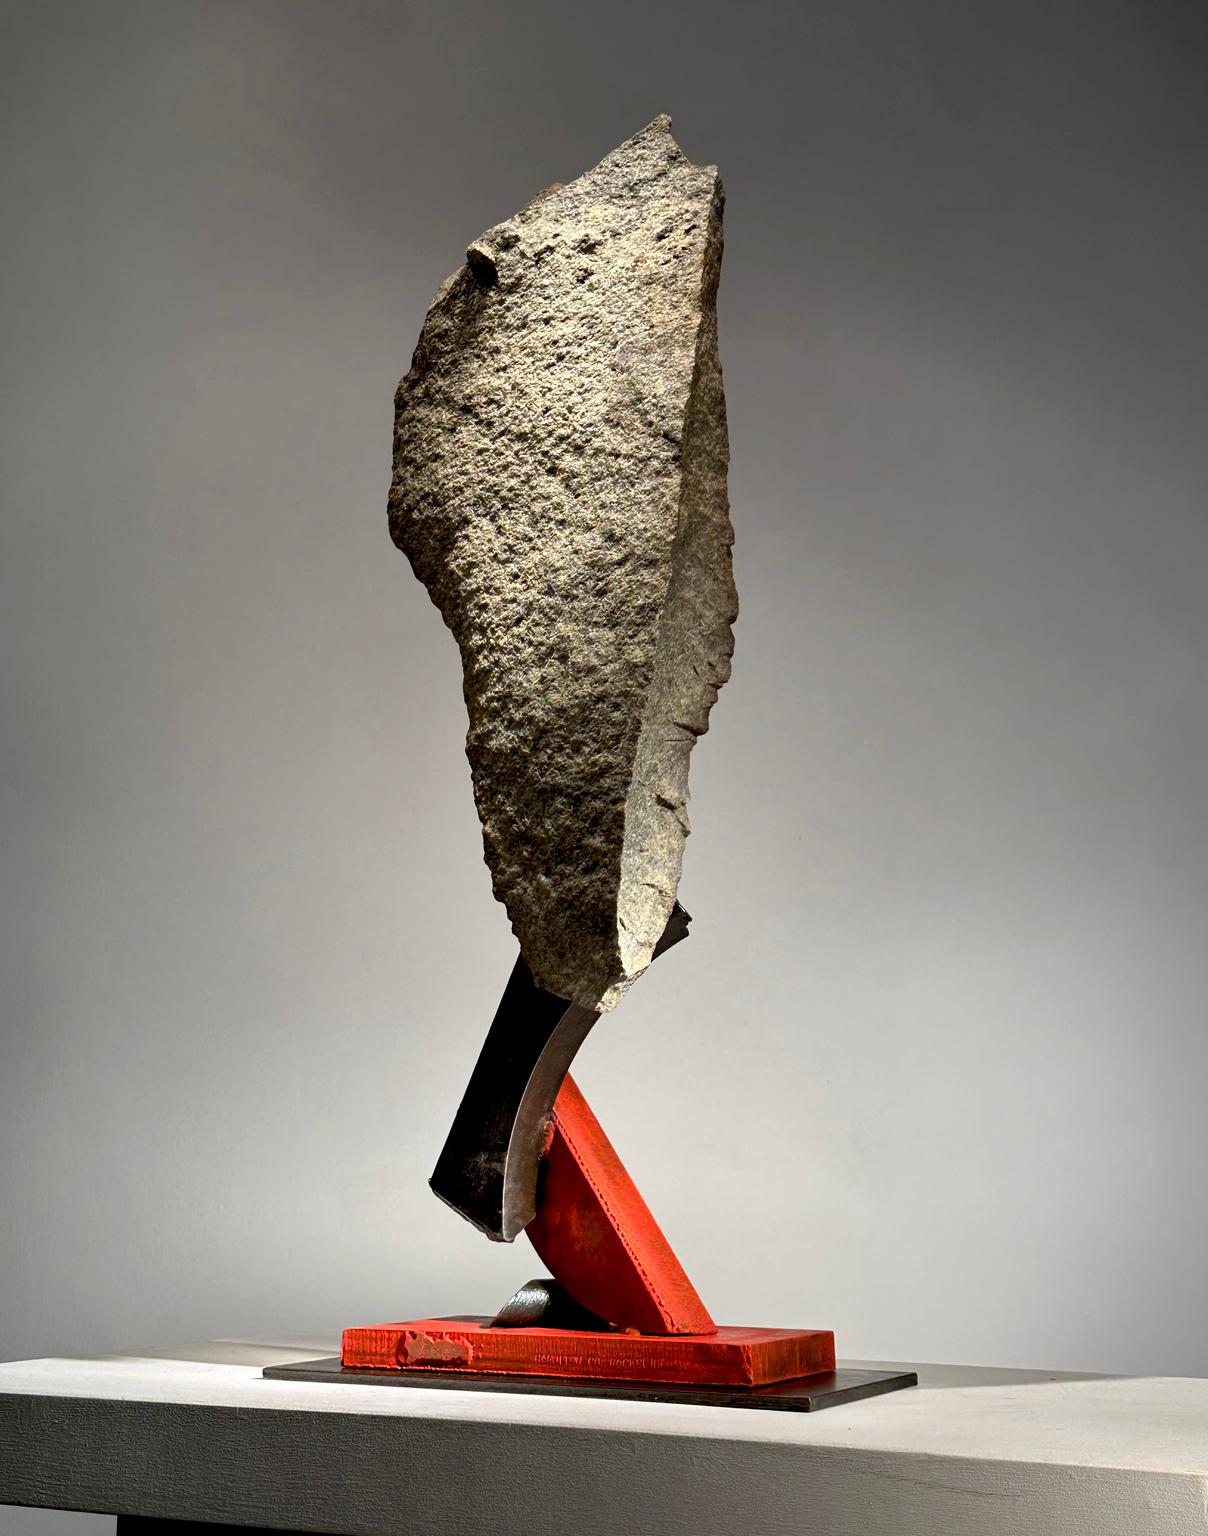 "Hamilton Co. Rockslide" by John Van Alstine
Green granite, pigmented and sealed steel

The sculpture of John Van Alstine beautifully, and powerfully, balances the union of stone and metal, while exploring the relationship of the purely natural and